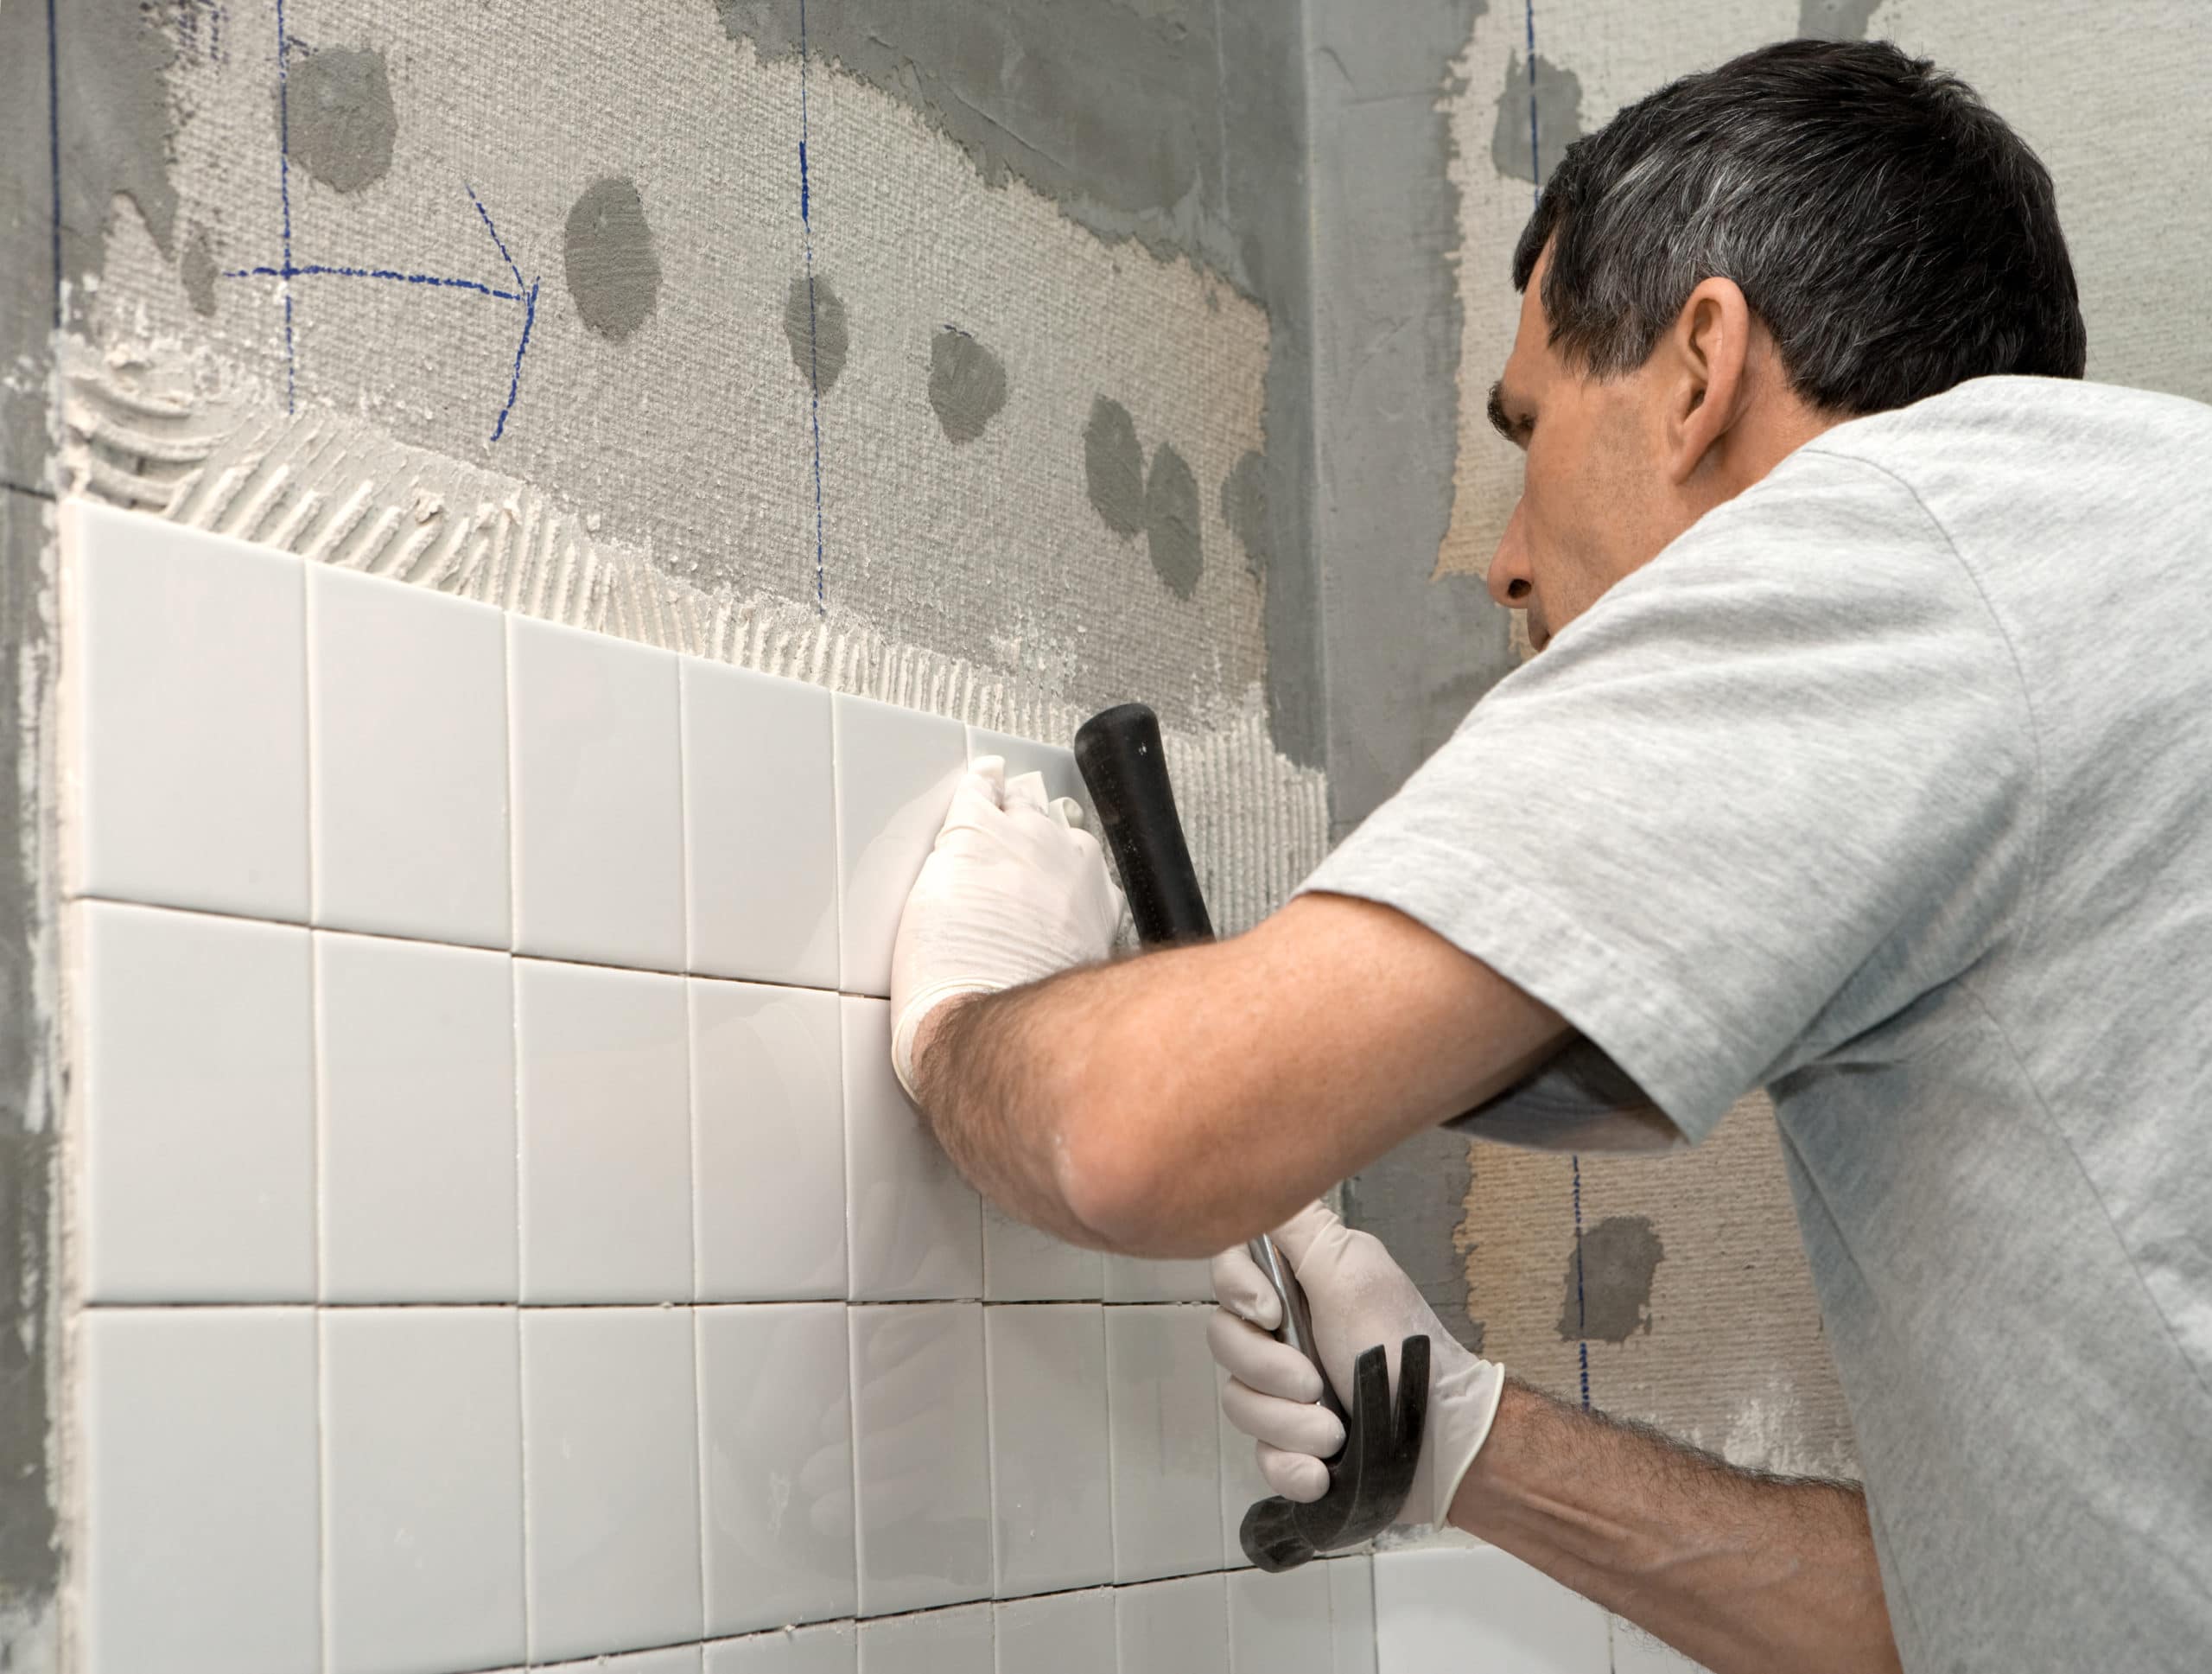 Man setting tile on cement board. He is tapping the tile in place with the handle of a hammer.